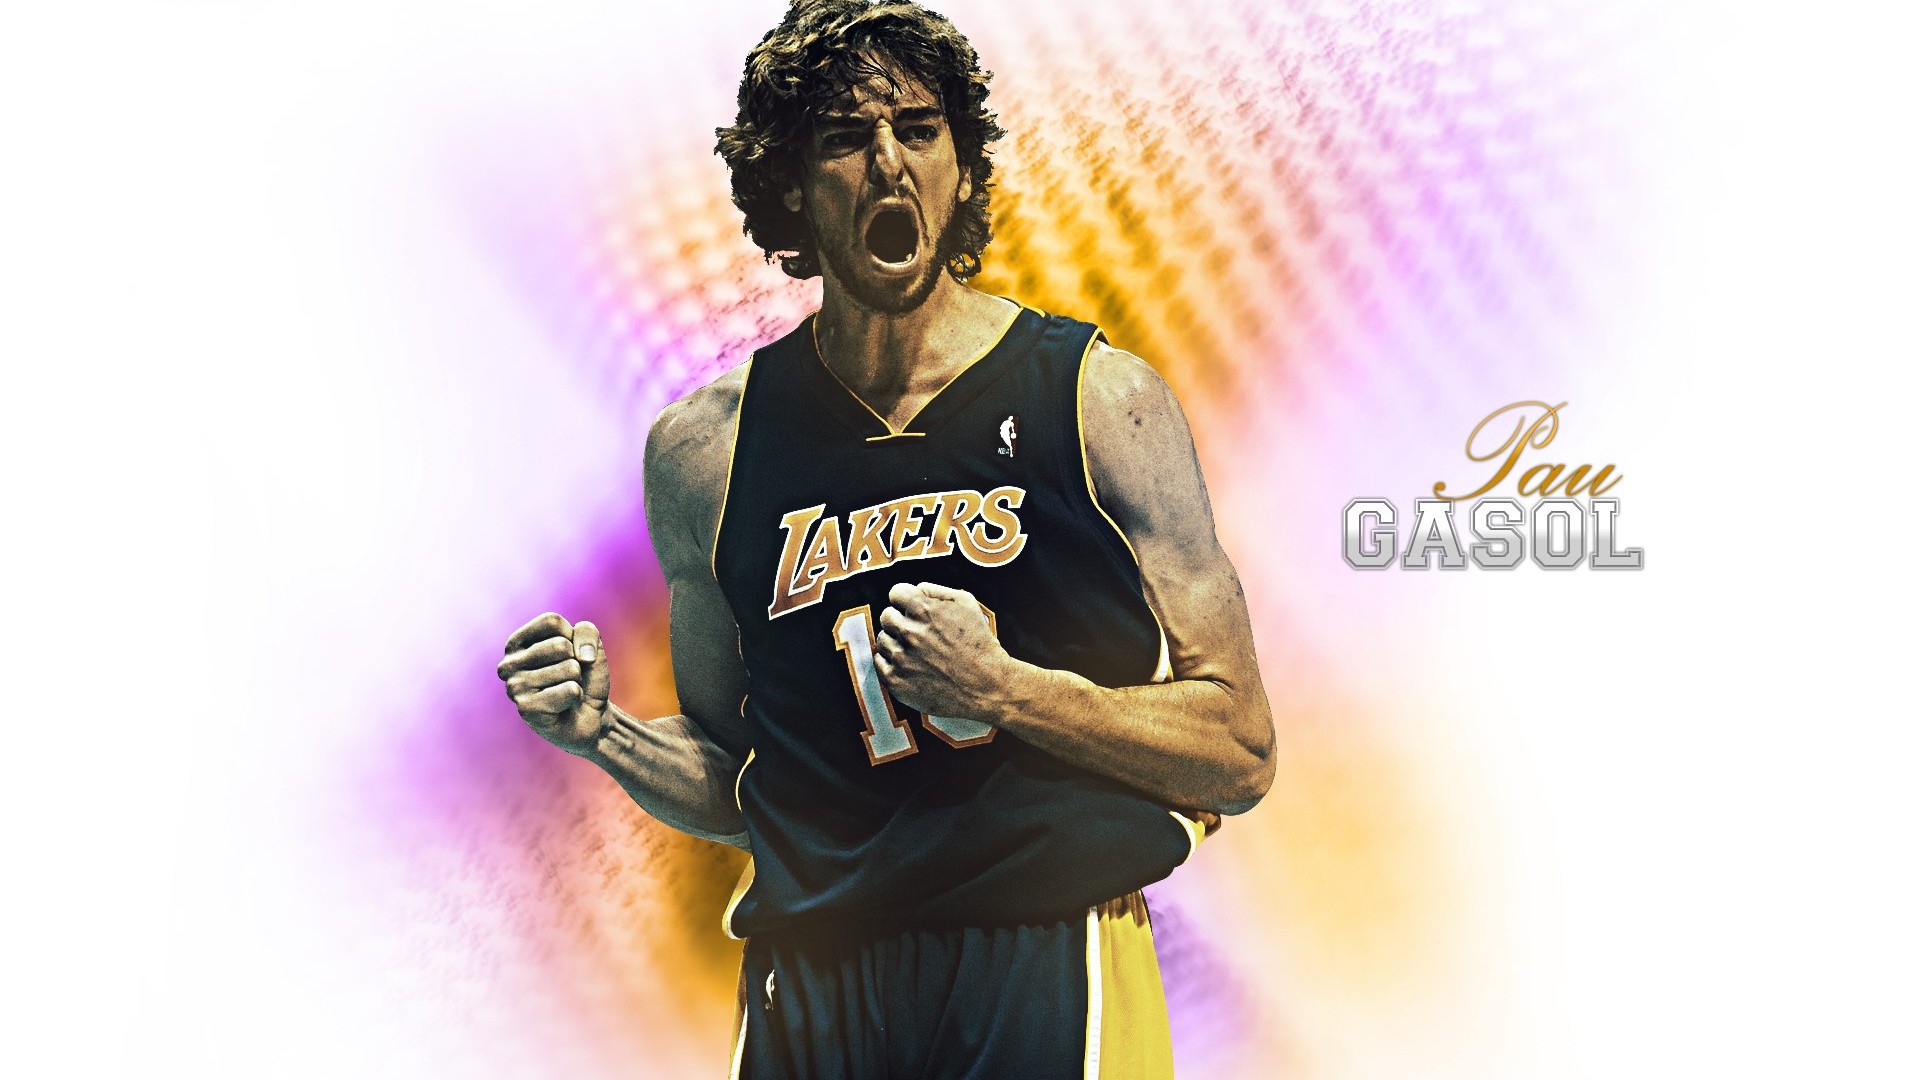 Los Angeles Lakers Official Wallpaper #21 - 1920x1080